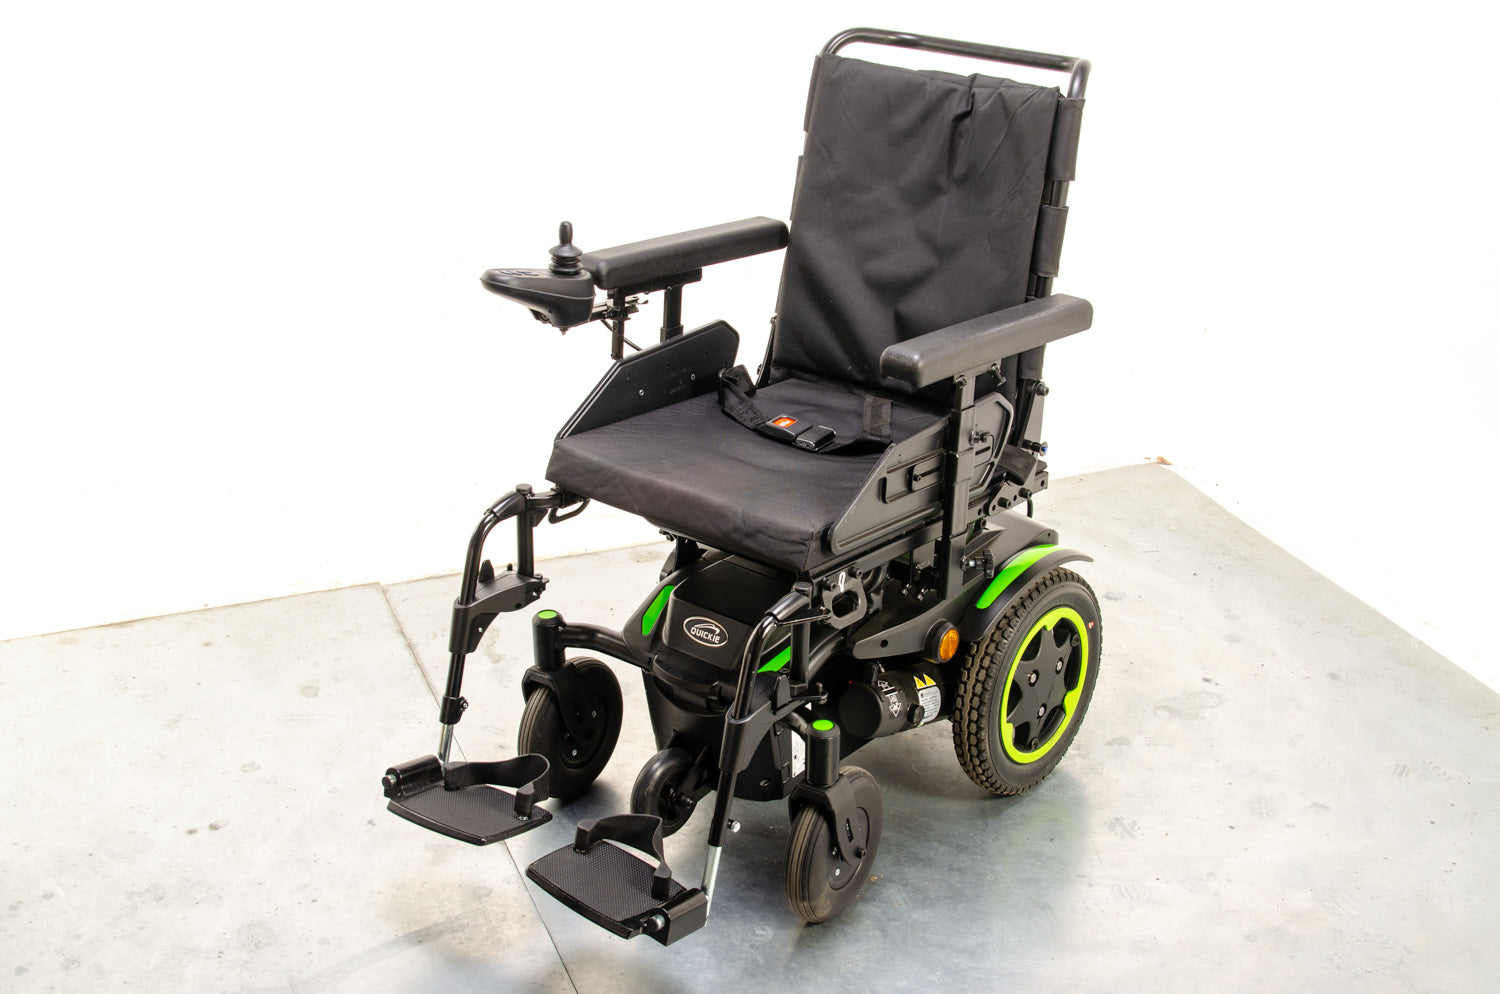 2022 Quickie Q100 R Compact Indoor Outdoor Powerchair Wheelchair Sunrise Medical 03682